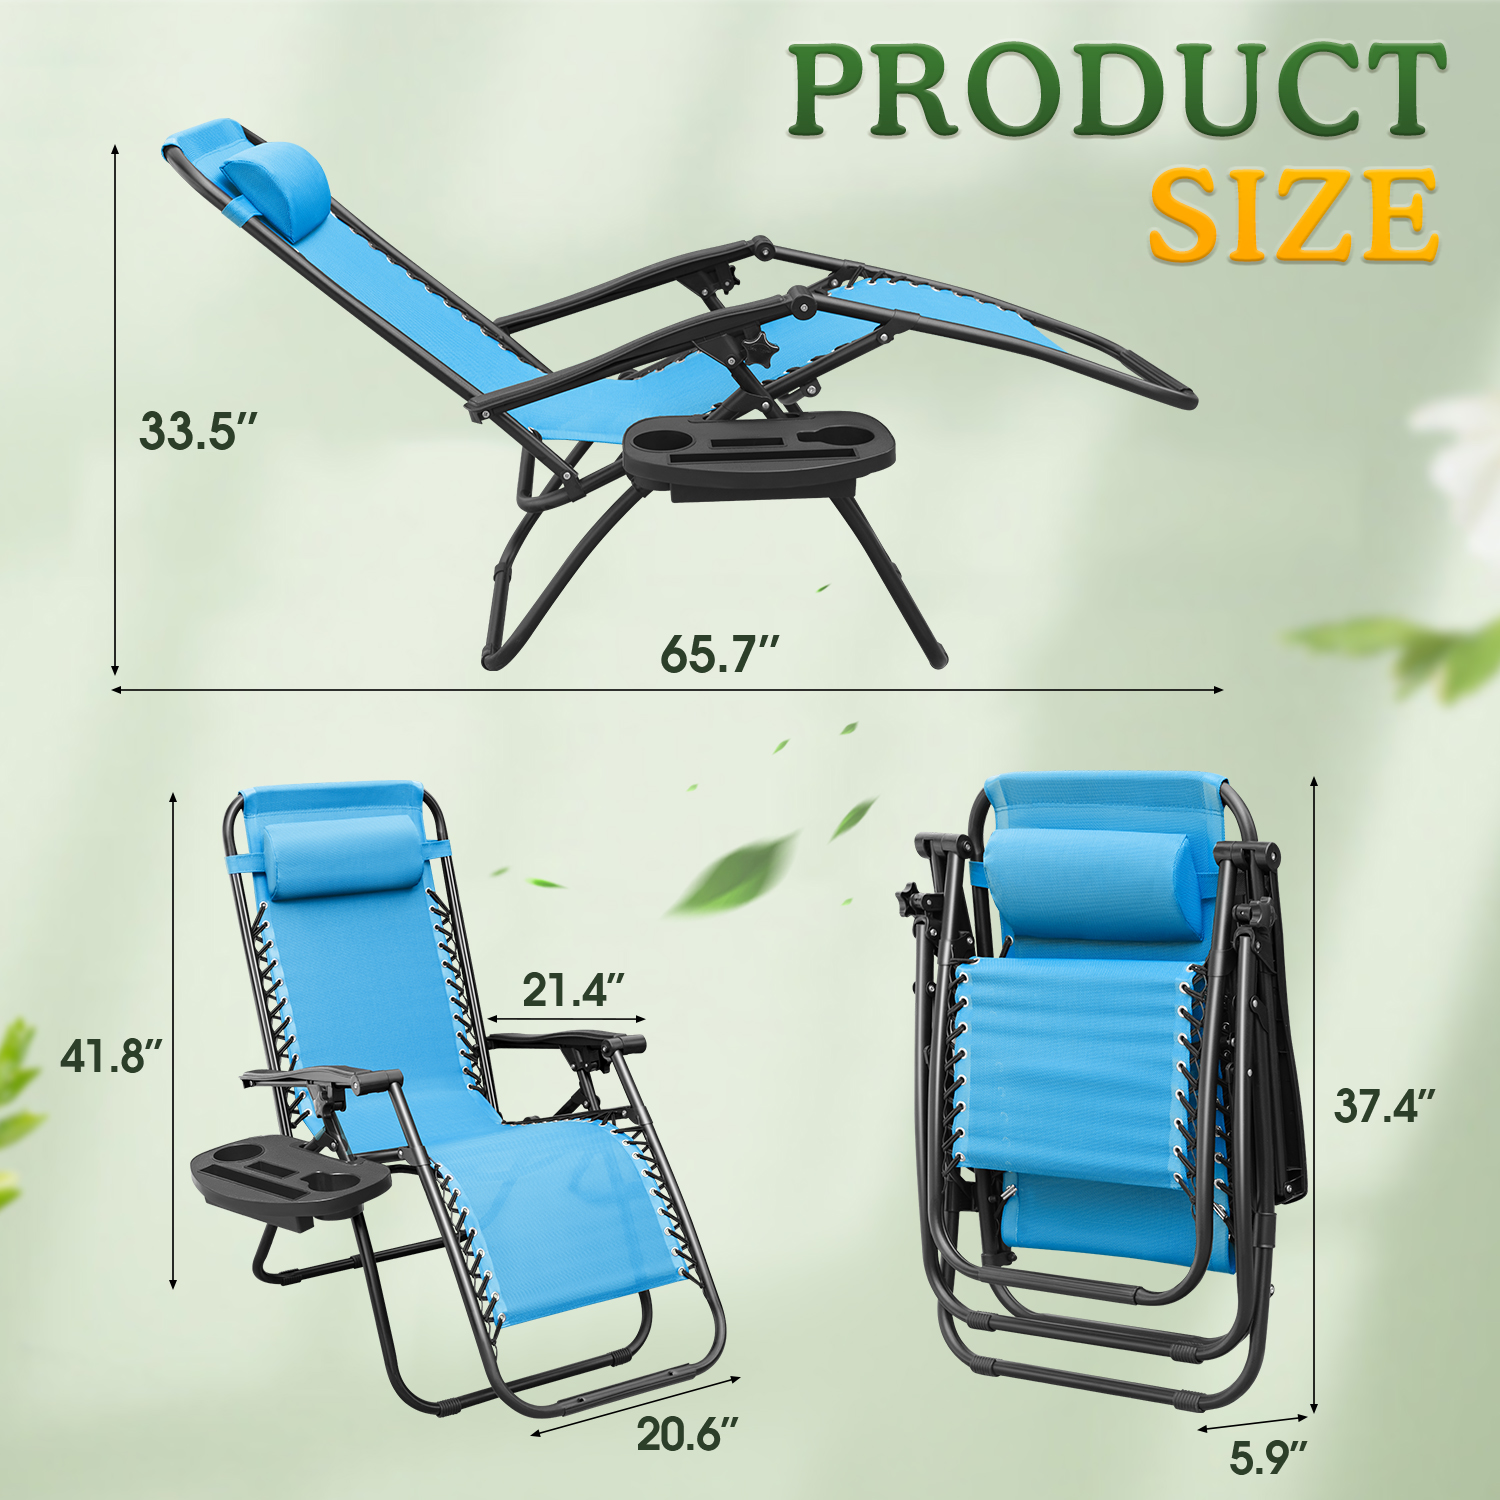 Lacoo Patio Zero Gravity Chair Outdoor Adjustable Recline Chair seating capacity 2, Light Blue - image 2 of 7